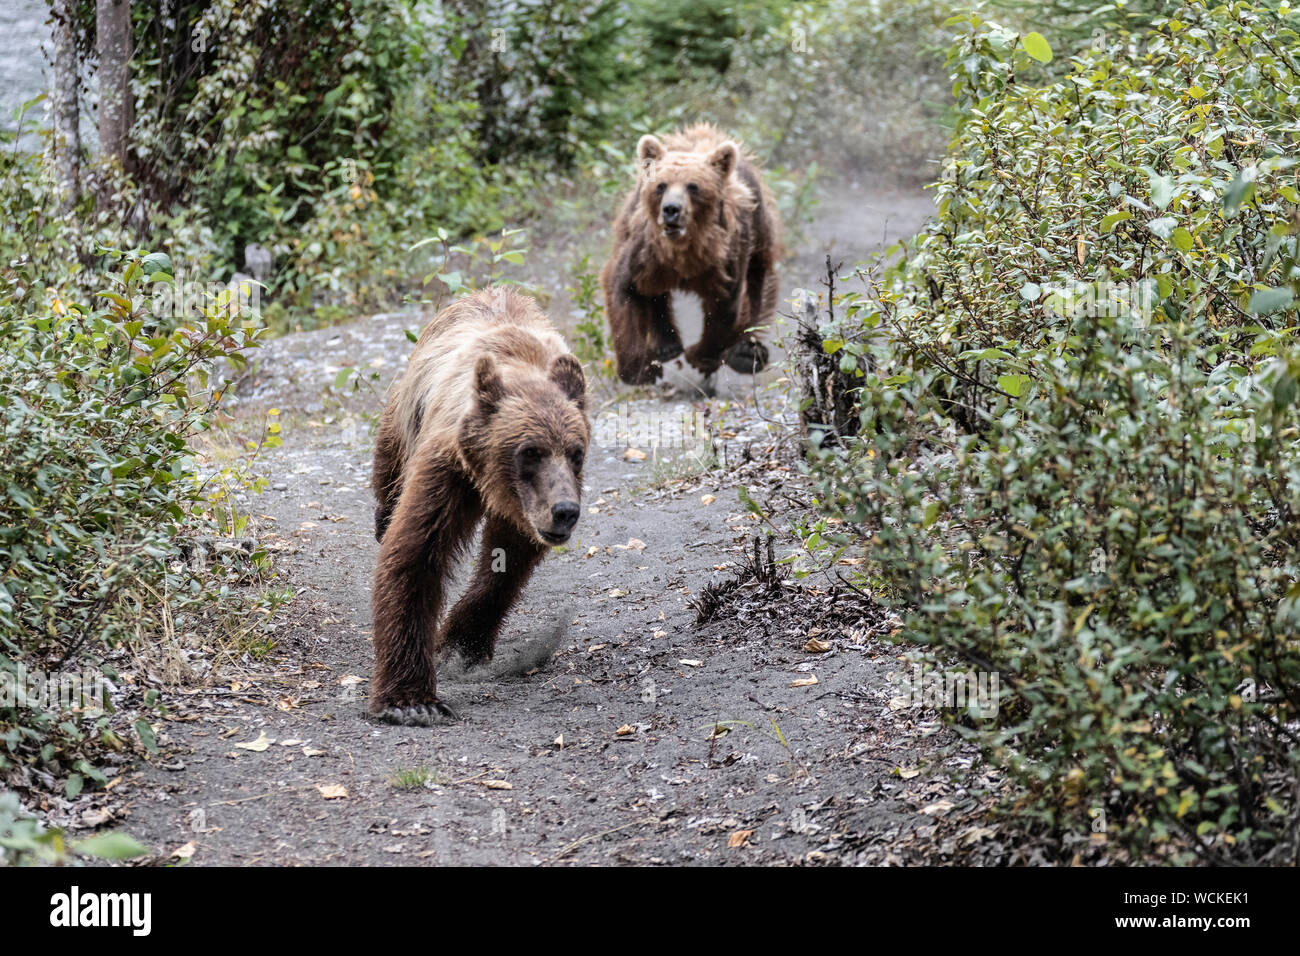 Female Grizzly Bear chasing off her young male cub, Ursus arctos horribilis, Brown Bear, North American, Canada, Stock Photo